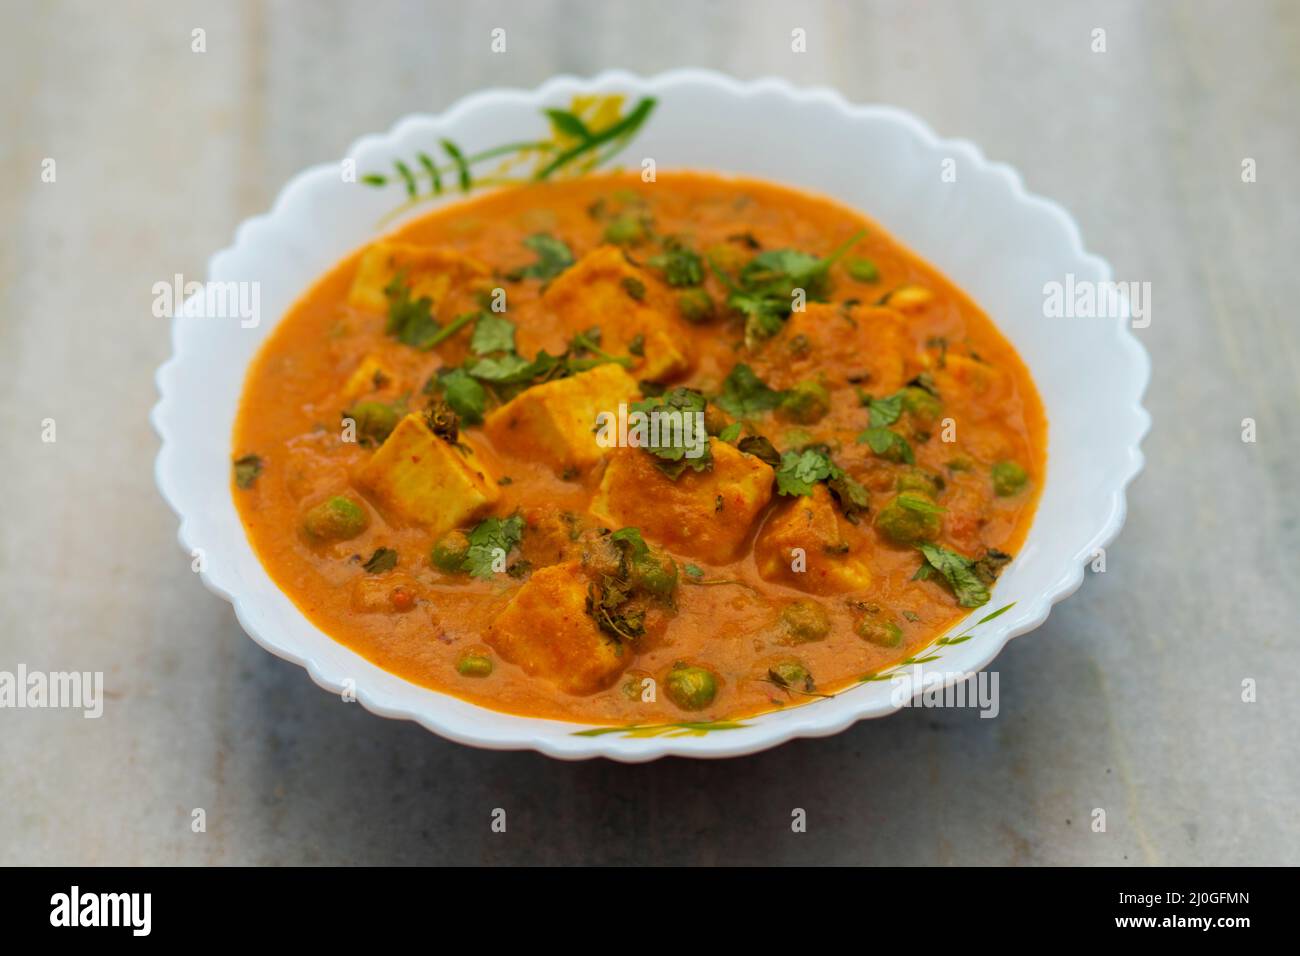 Famous Indian dish 'matar paneer' is ready to serve. Stock Photo